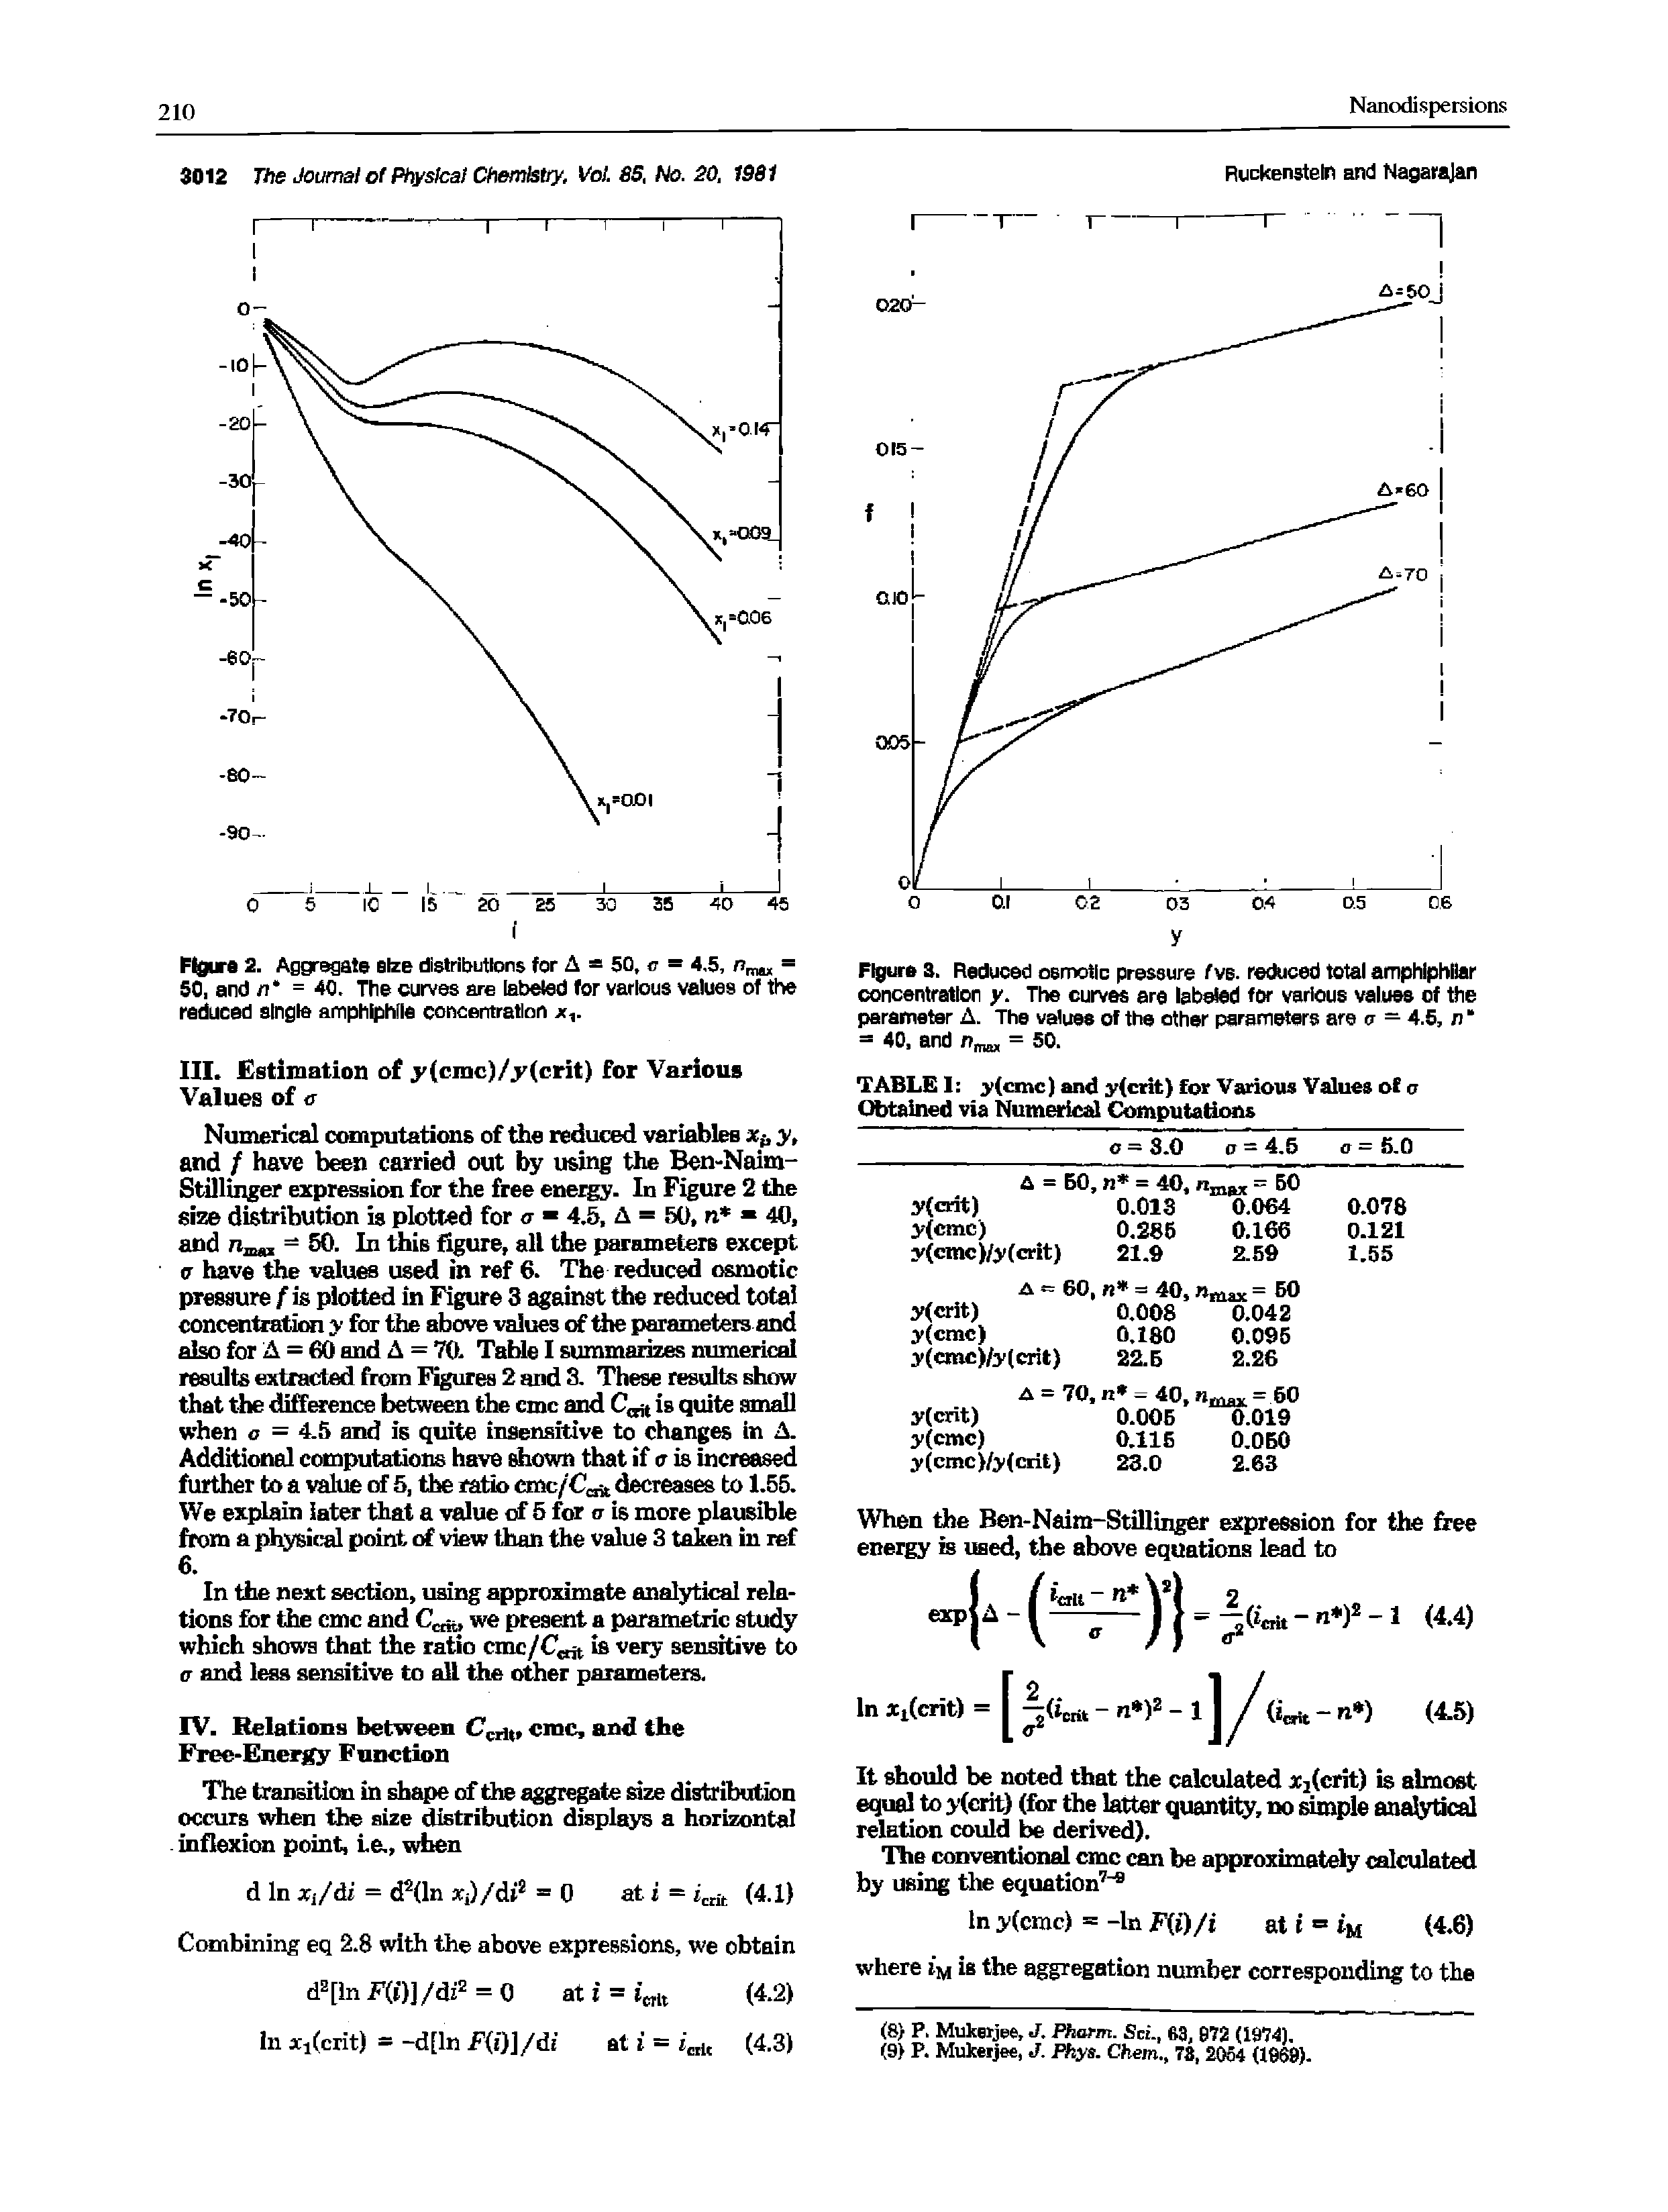 Figure 3. Reduced osmotic pressure fve. reduced total amphlphllar concentration y. The curves are labeled for various values of the parameter A. The values of the other parameters are o — 4.5, n = 40, and n = 50.